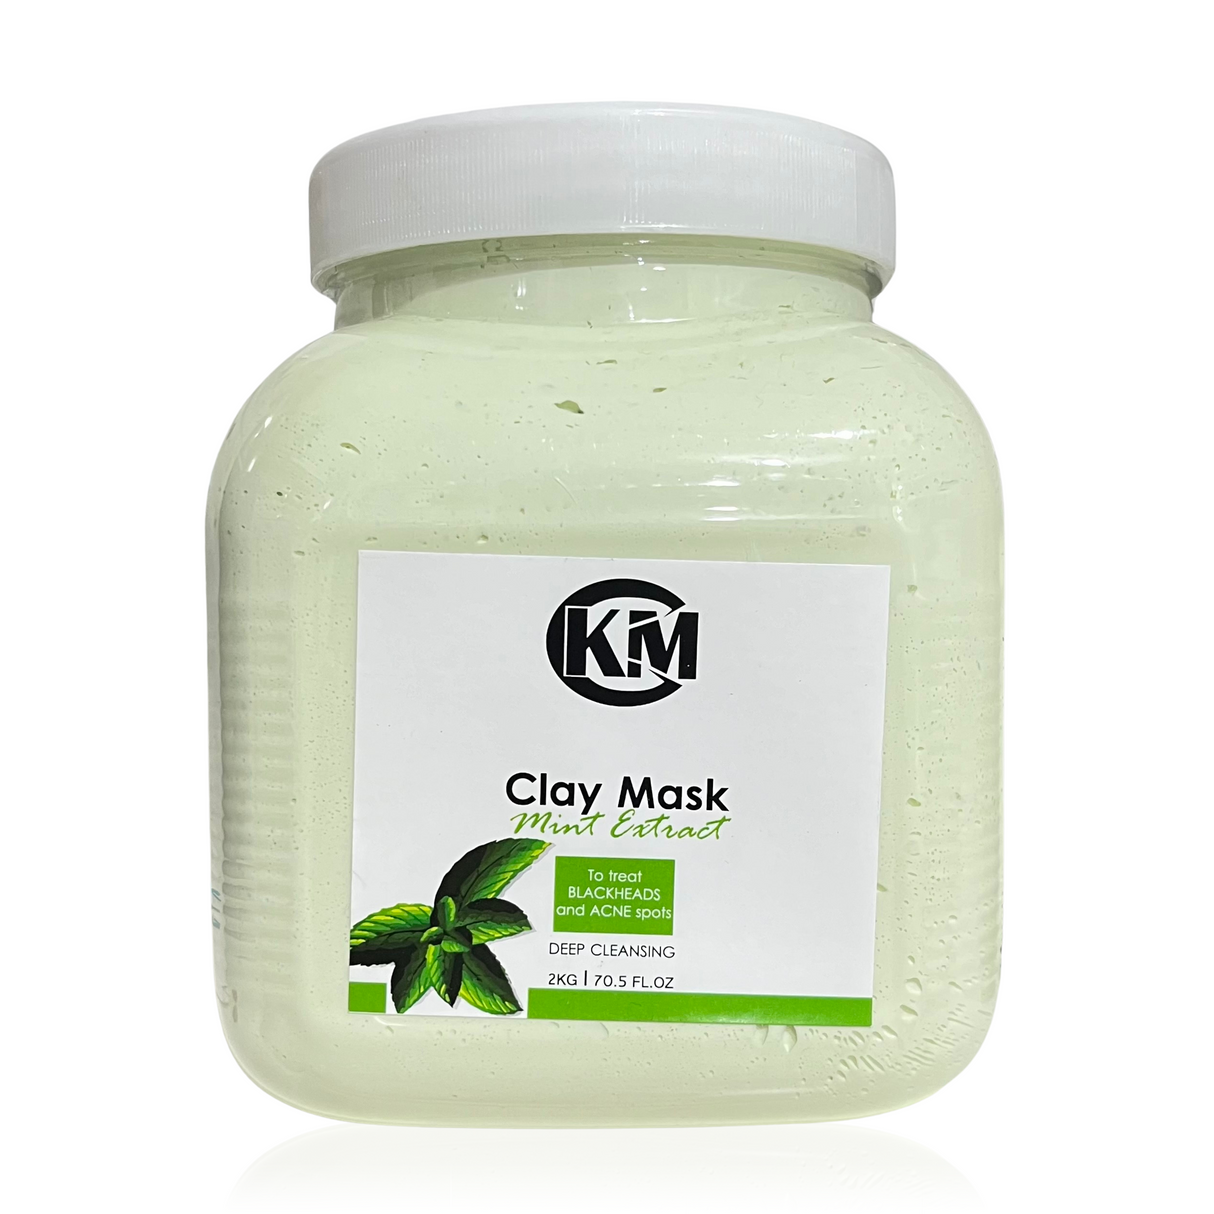 KM - Clay Mask Mint Extract , For Balckheads & Acne 2kg